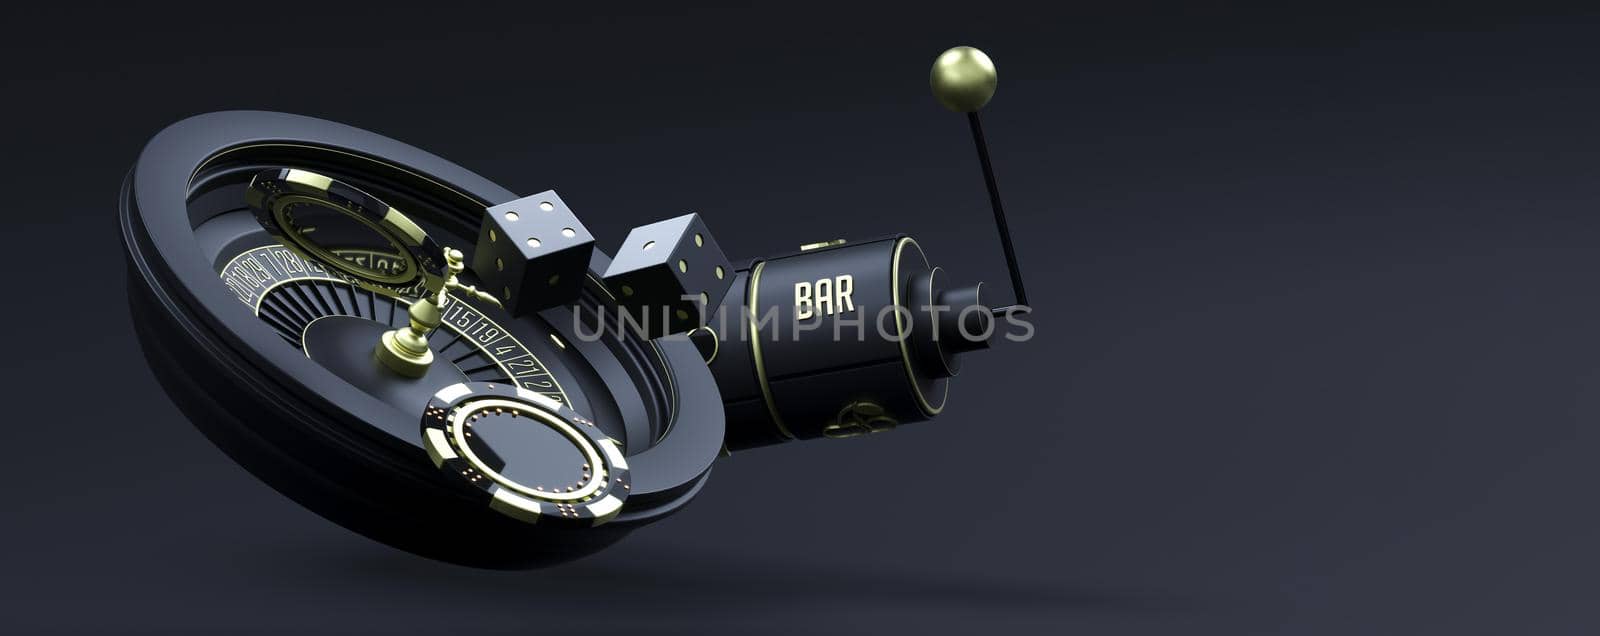 Modern casino background with place for text. Luxury casino roulette wheel on black background with copy space. Online casino theme. Poker game table. 3d rendering. by Dvorak